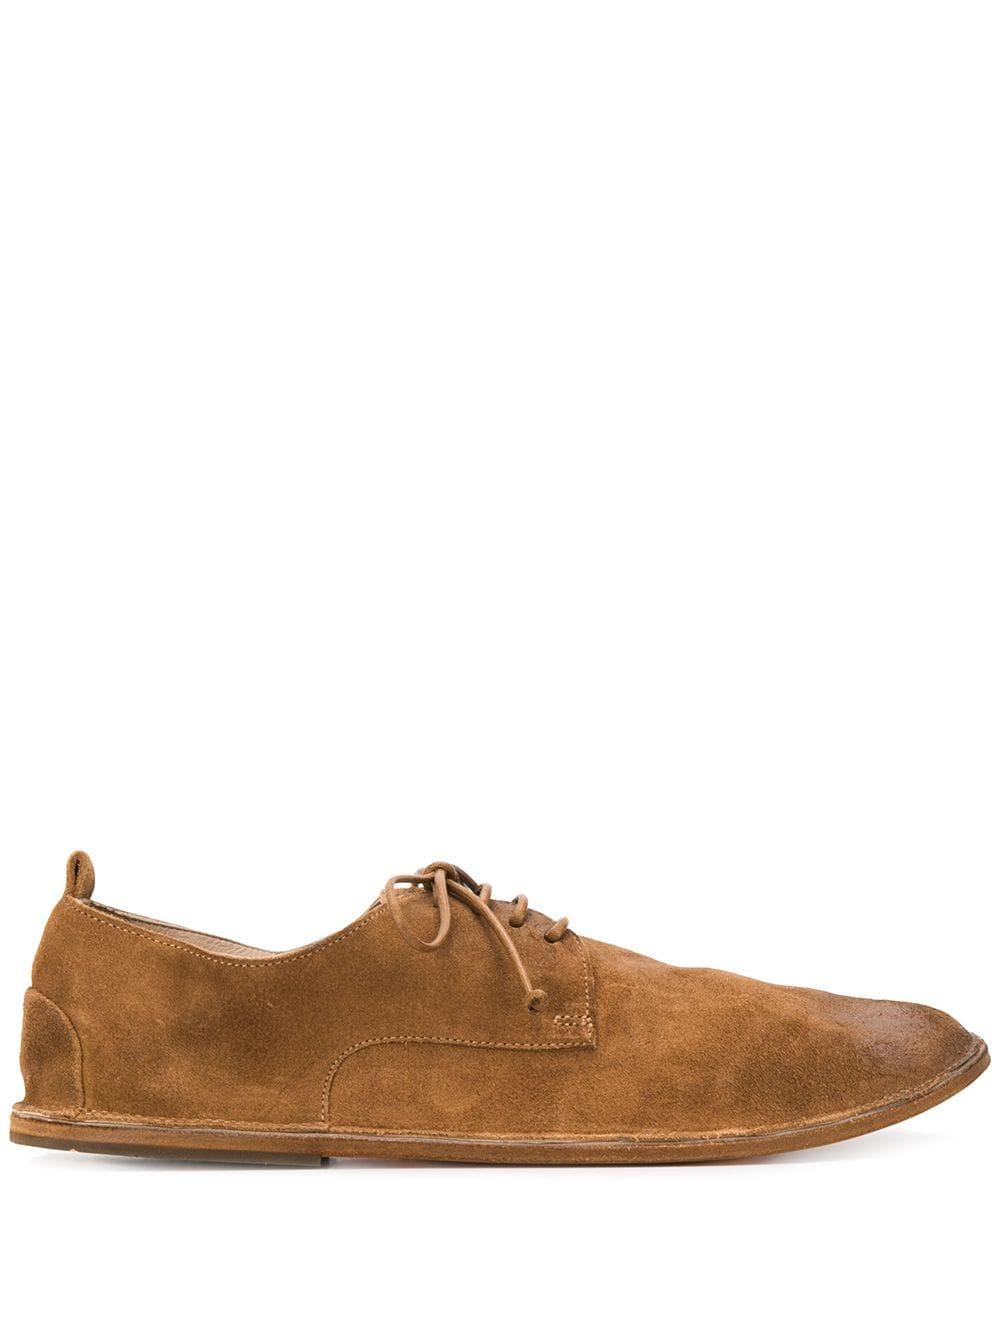 Marsèll Suede Flat-sole Derby Shoes in Brown for Men - Lyst